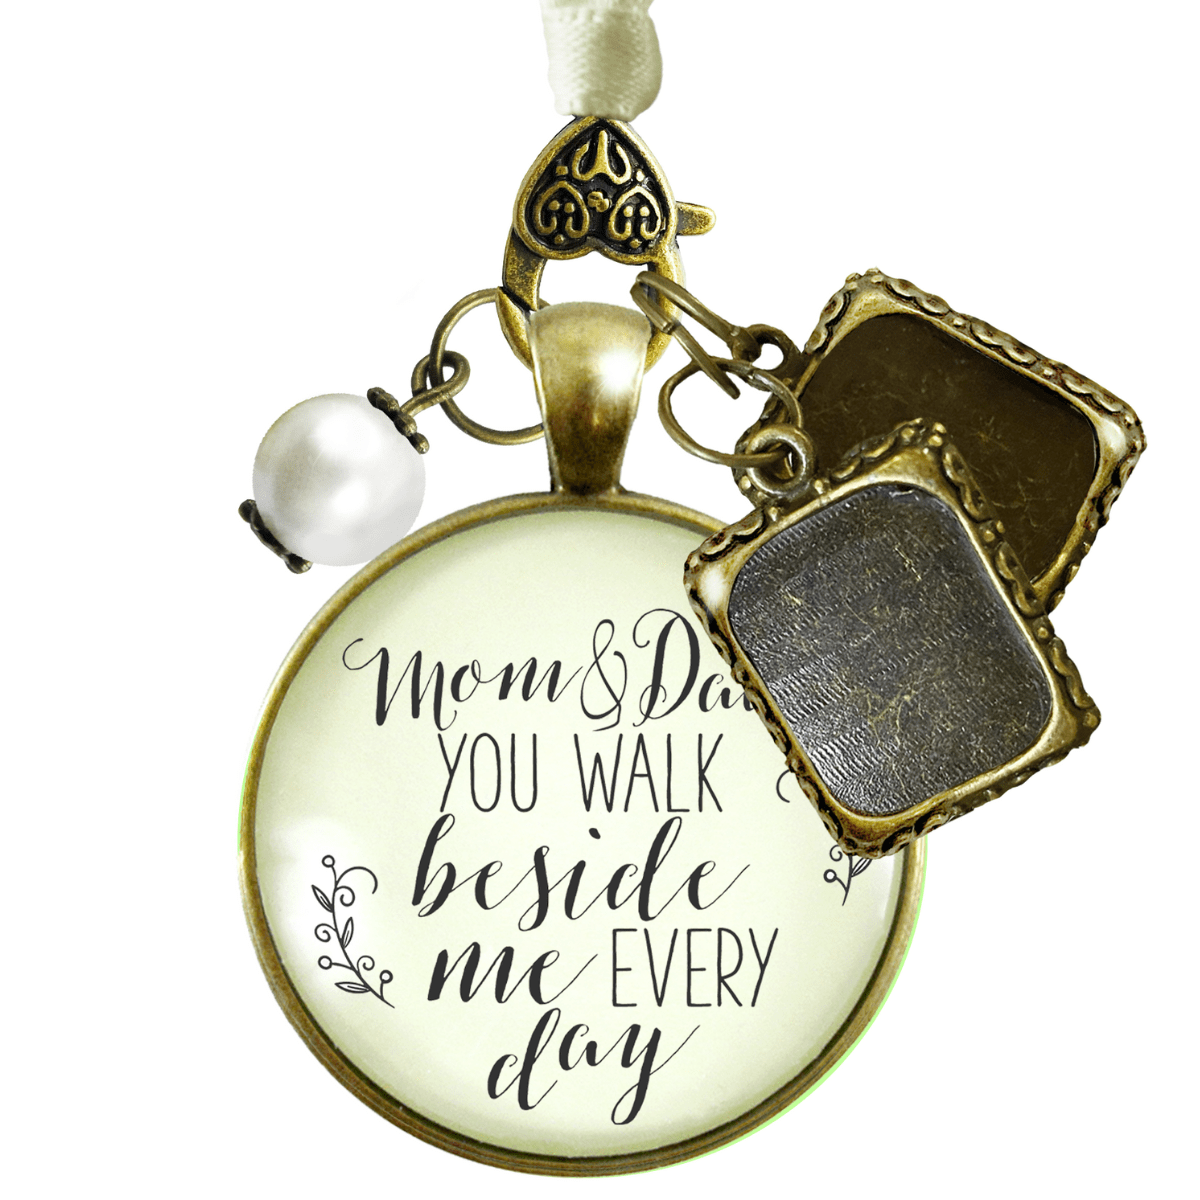 Bouquet Charm Mom Dad Remembrance Parents Memory White Wedding Jewelry 2 Photo Frames - Gutsy Goodness Handmade Jewelry Gifts